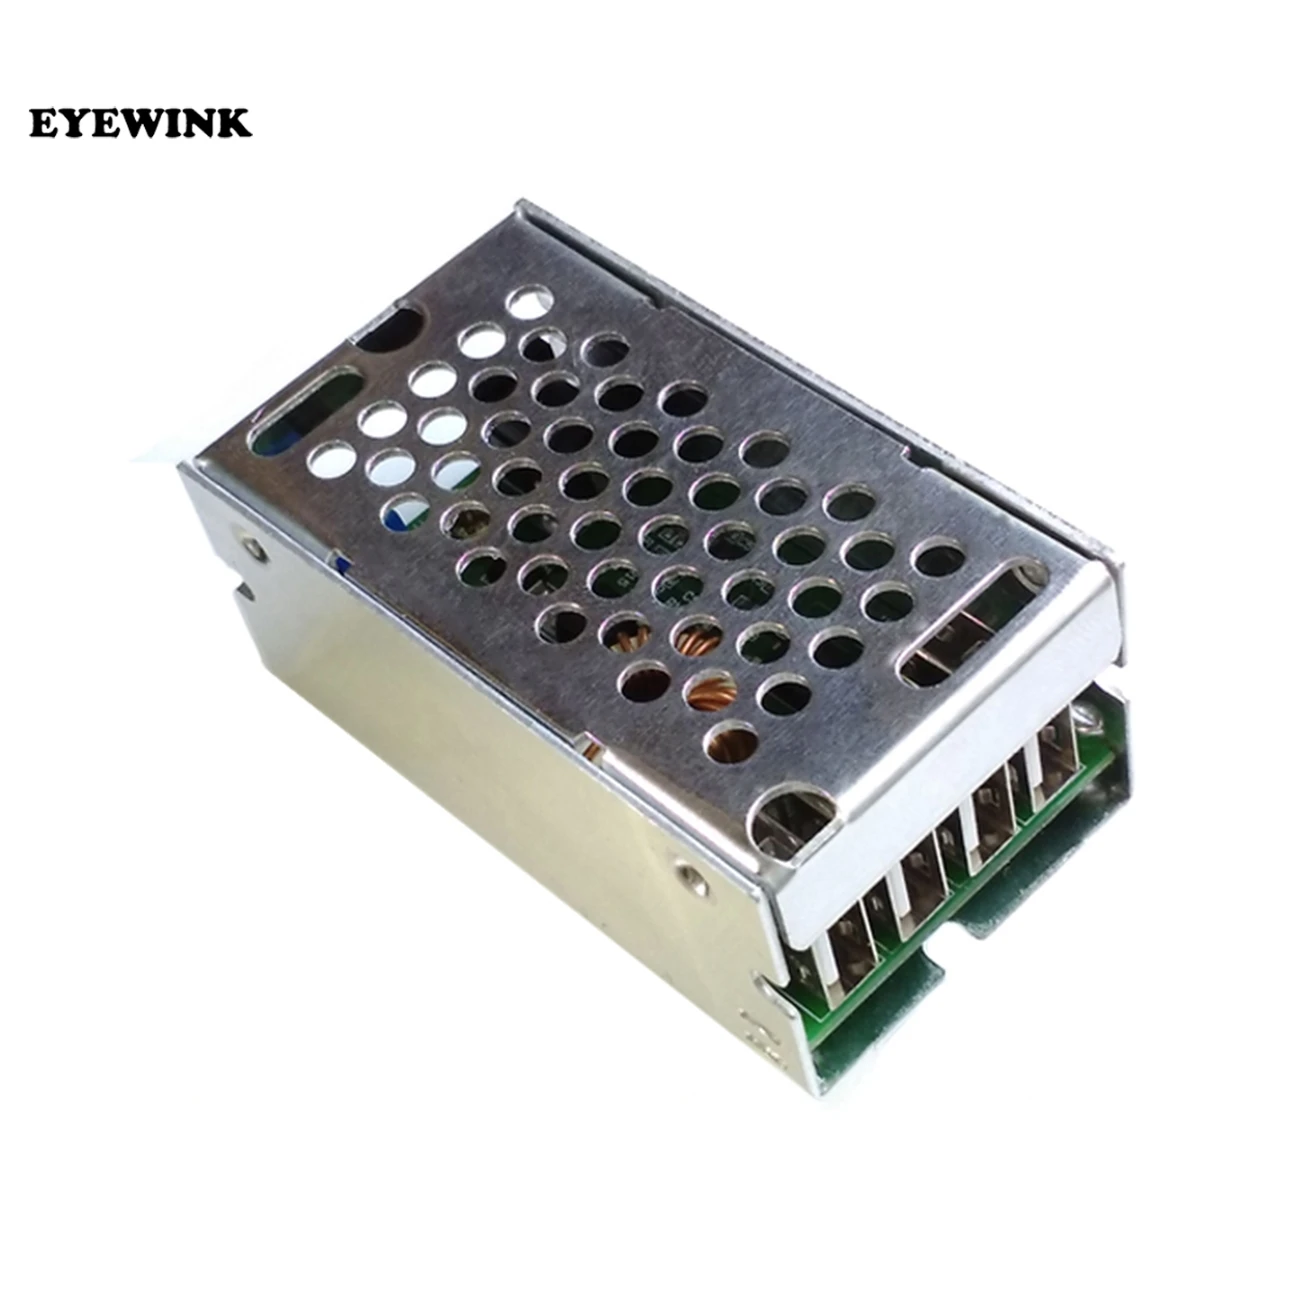 

DC-DC 9V 12V 24V 36V To 5V Step Down Board 5A 4 USB Output Buck Converter Power Supply Module with Aluminum Shell For Phones